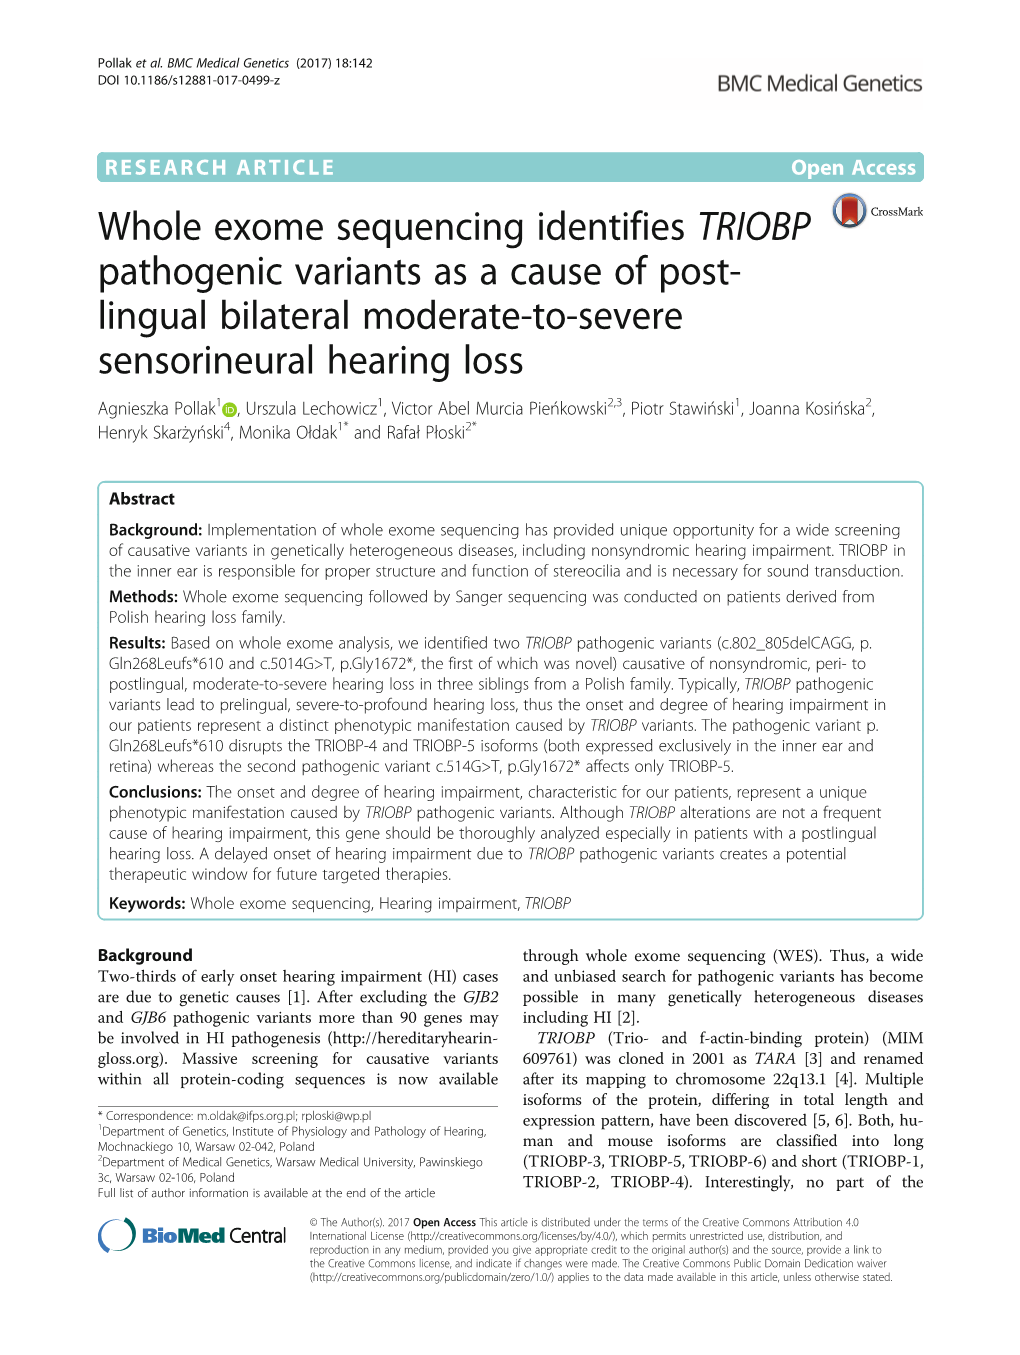 Whole Exome Sequencing Identifies TRIOBP Pathogenic Variants As A